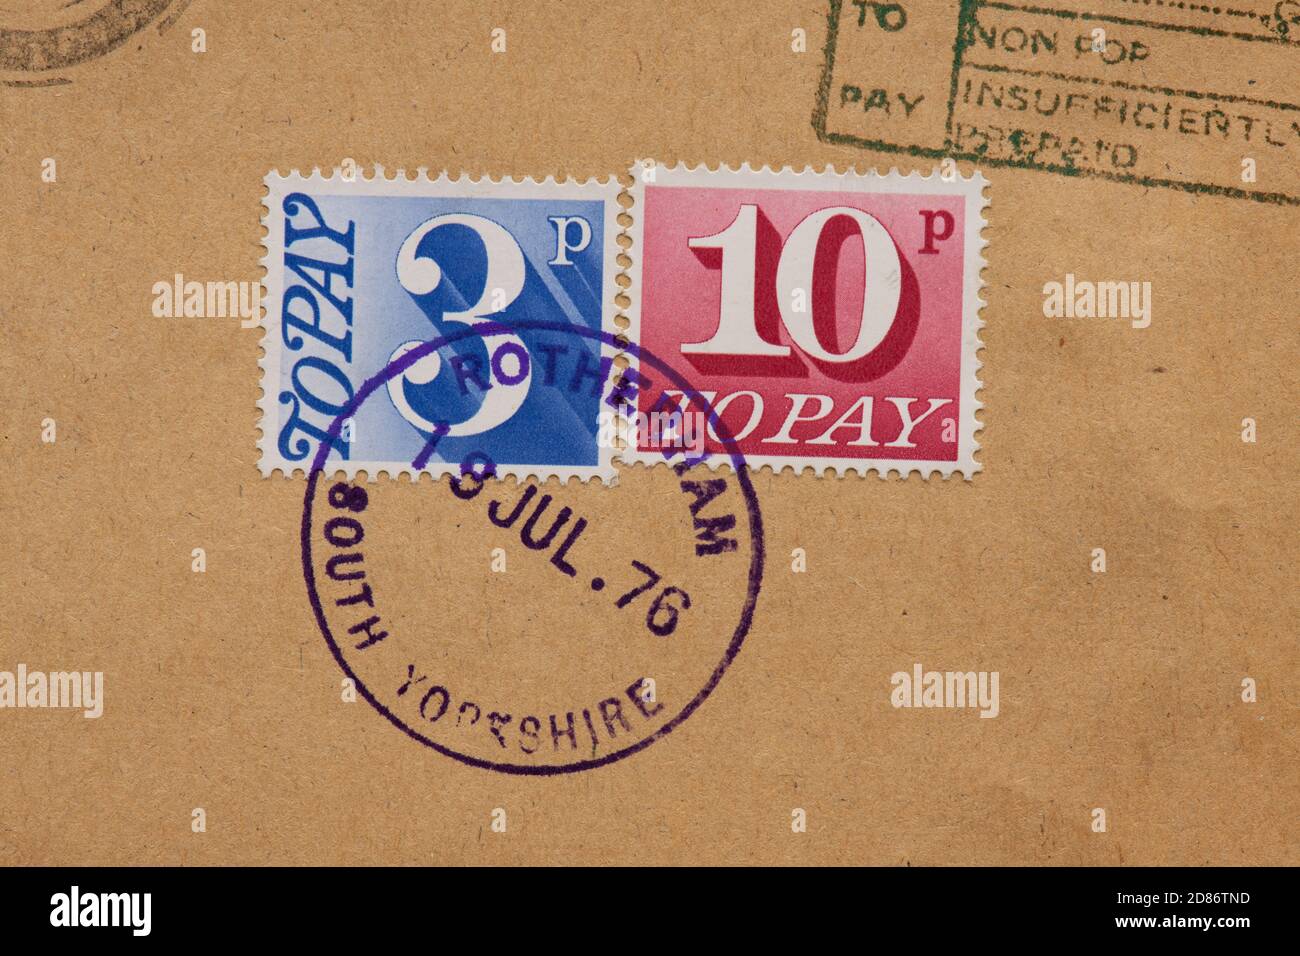 3p and 10p to pay stamps on envelope where sender has paid insufficient postage - franked 1976 - UK Stock Photo